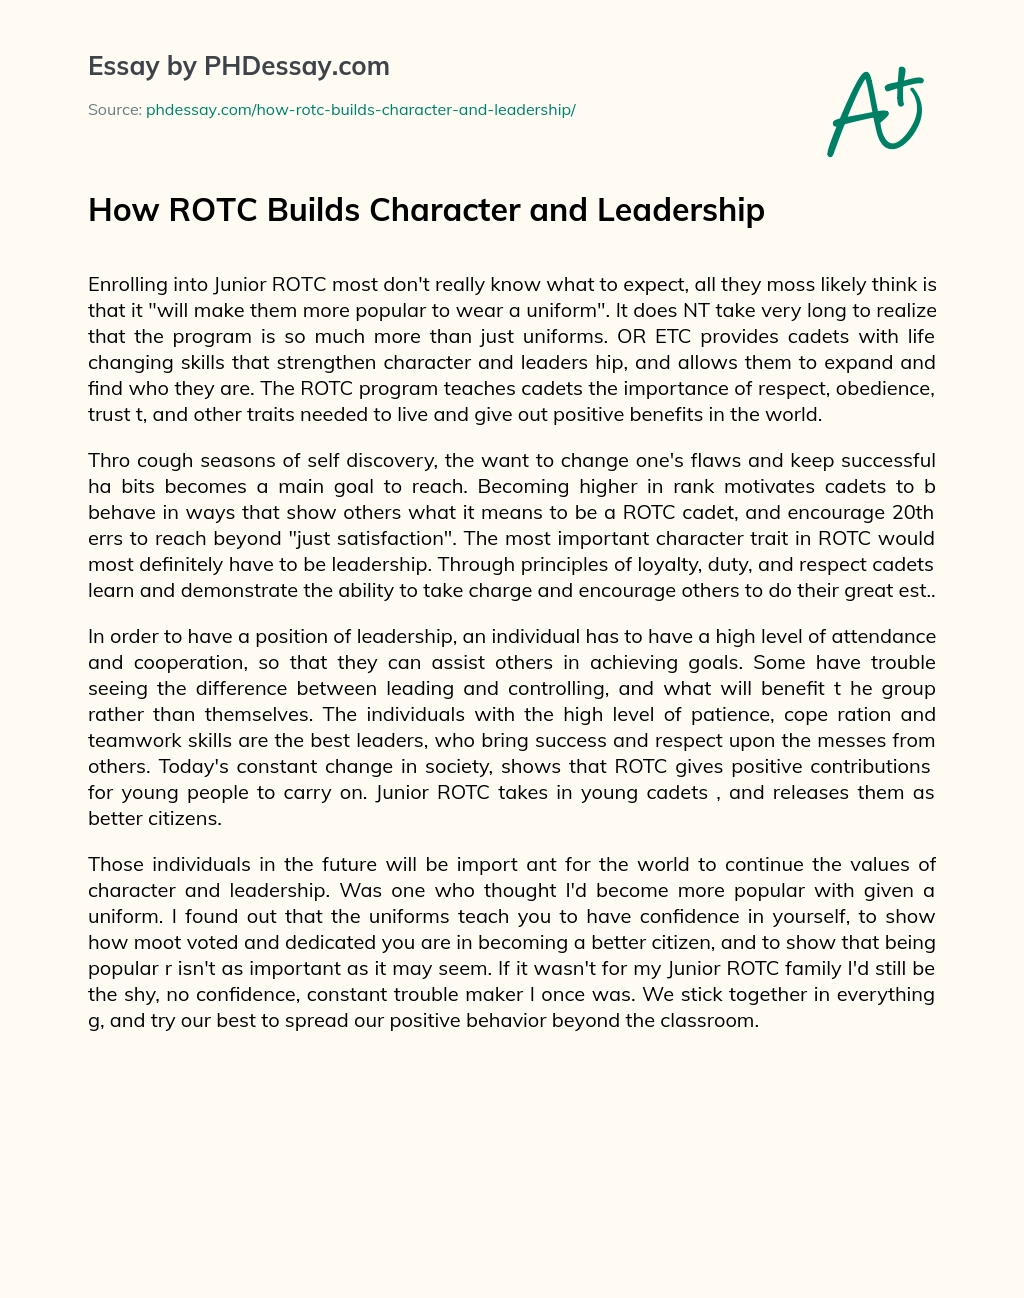 How ROTC Builds Character and Leadership essay